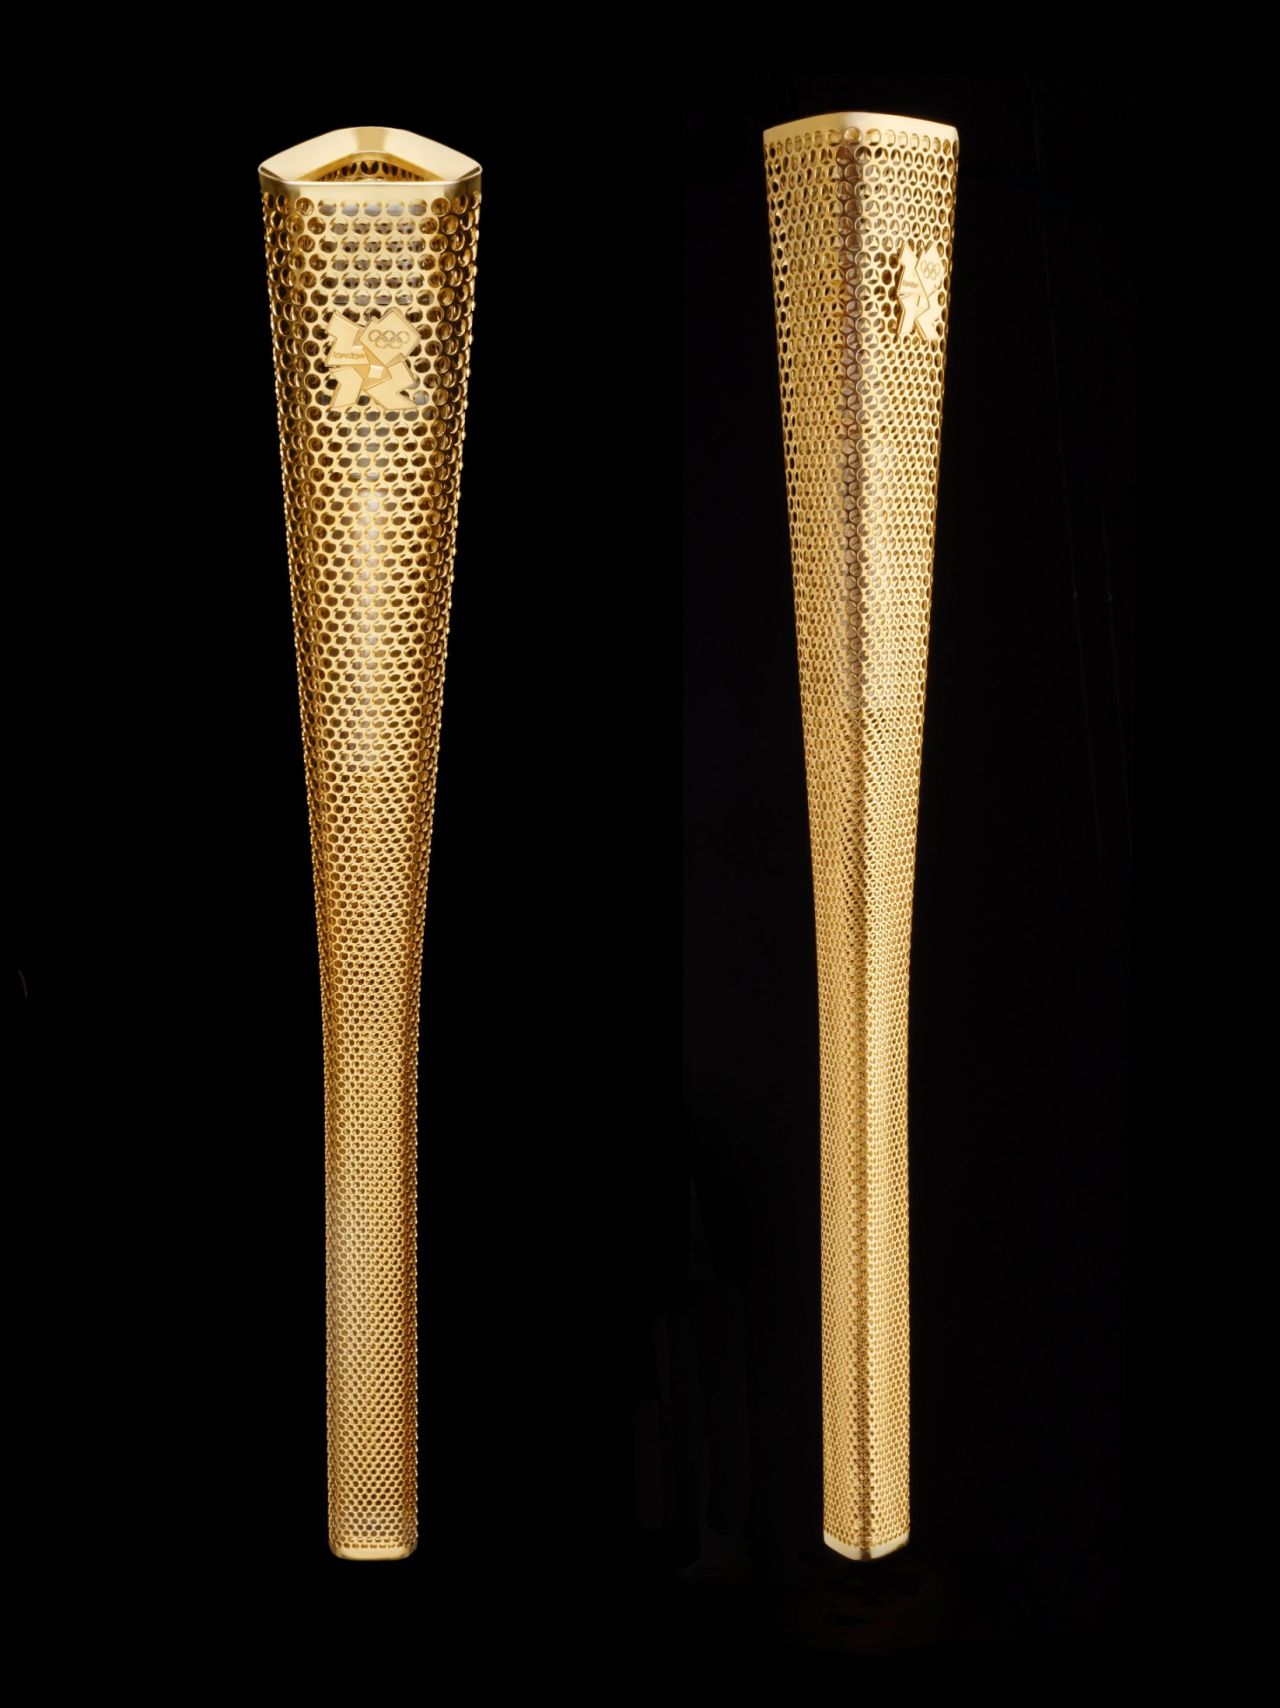 The 2012 London Olympic Games may have been mostly about the blood, sweat and tears of the athletes, but making waves in the world of design was Edward Barber and Jay Osgerby's flaming torch which won the prestigious Design of the Year award in 2012. Its trilateral form was developed to signify a pattern of trinities in the history of the Olympics, and the games' motto: Faster, Higher, Stronger. Imprinted by lasers, the torch's 8,000 circles create a transparency which gives onlookers a glimpse into the heart of the fire.